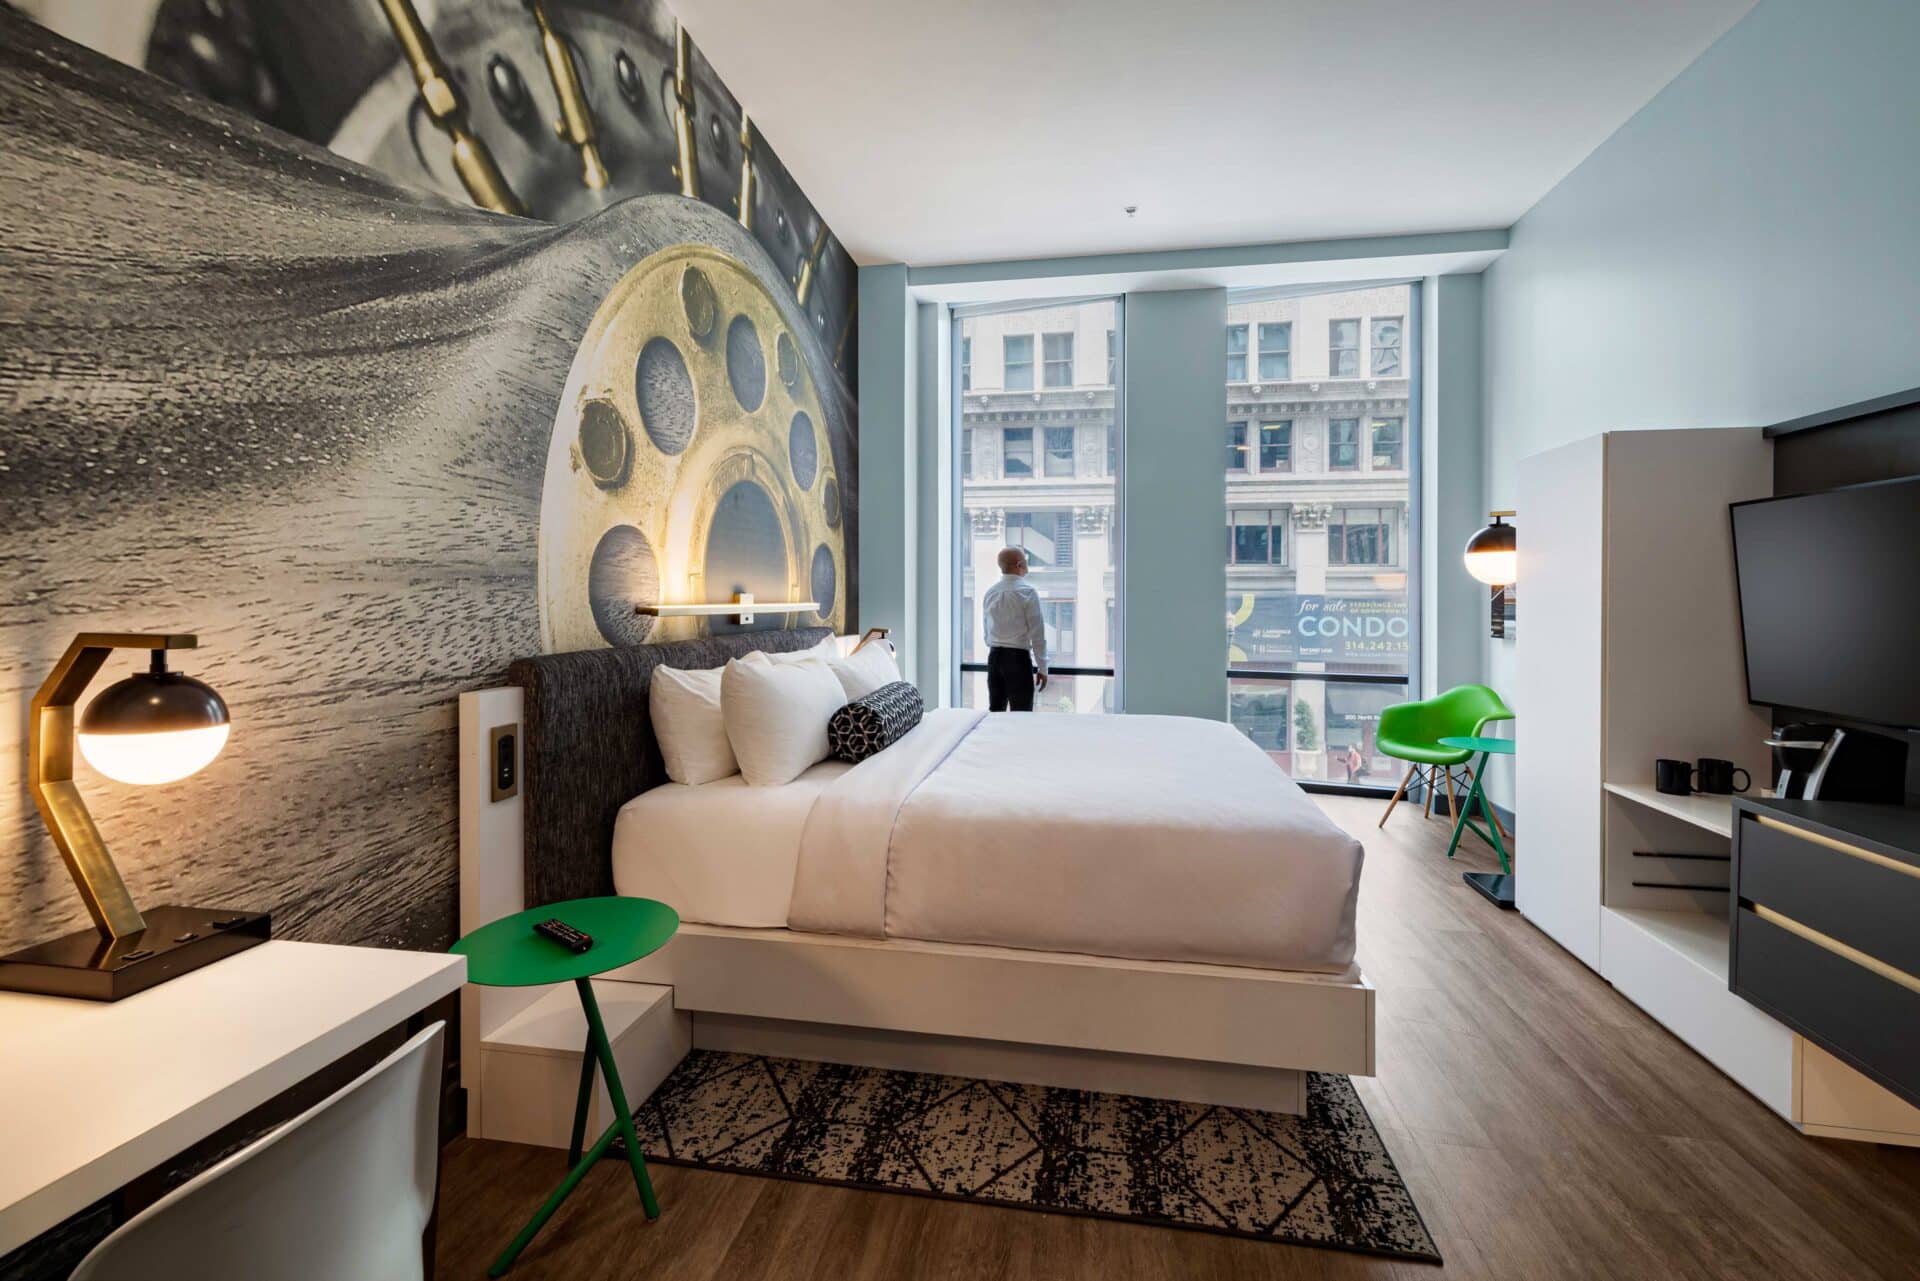 Interior Guest Room at Hotel Indigo - Designed by Trivers Architectural Firm